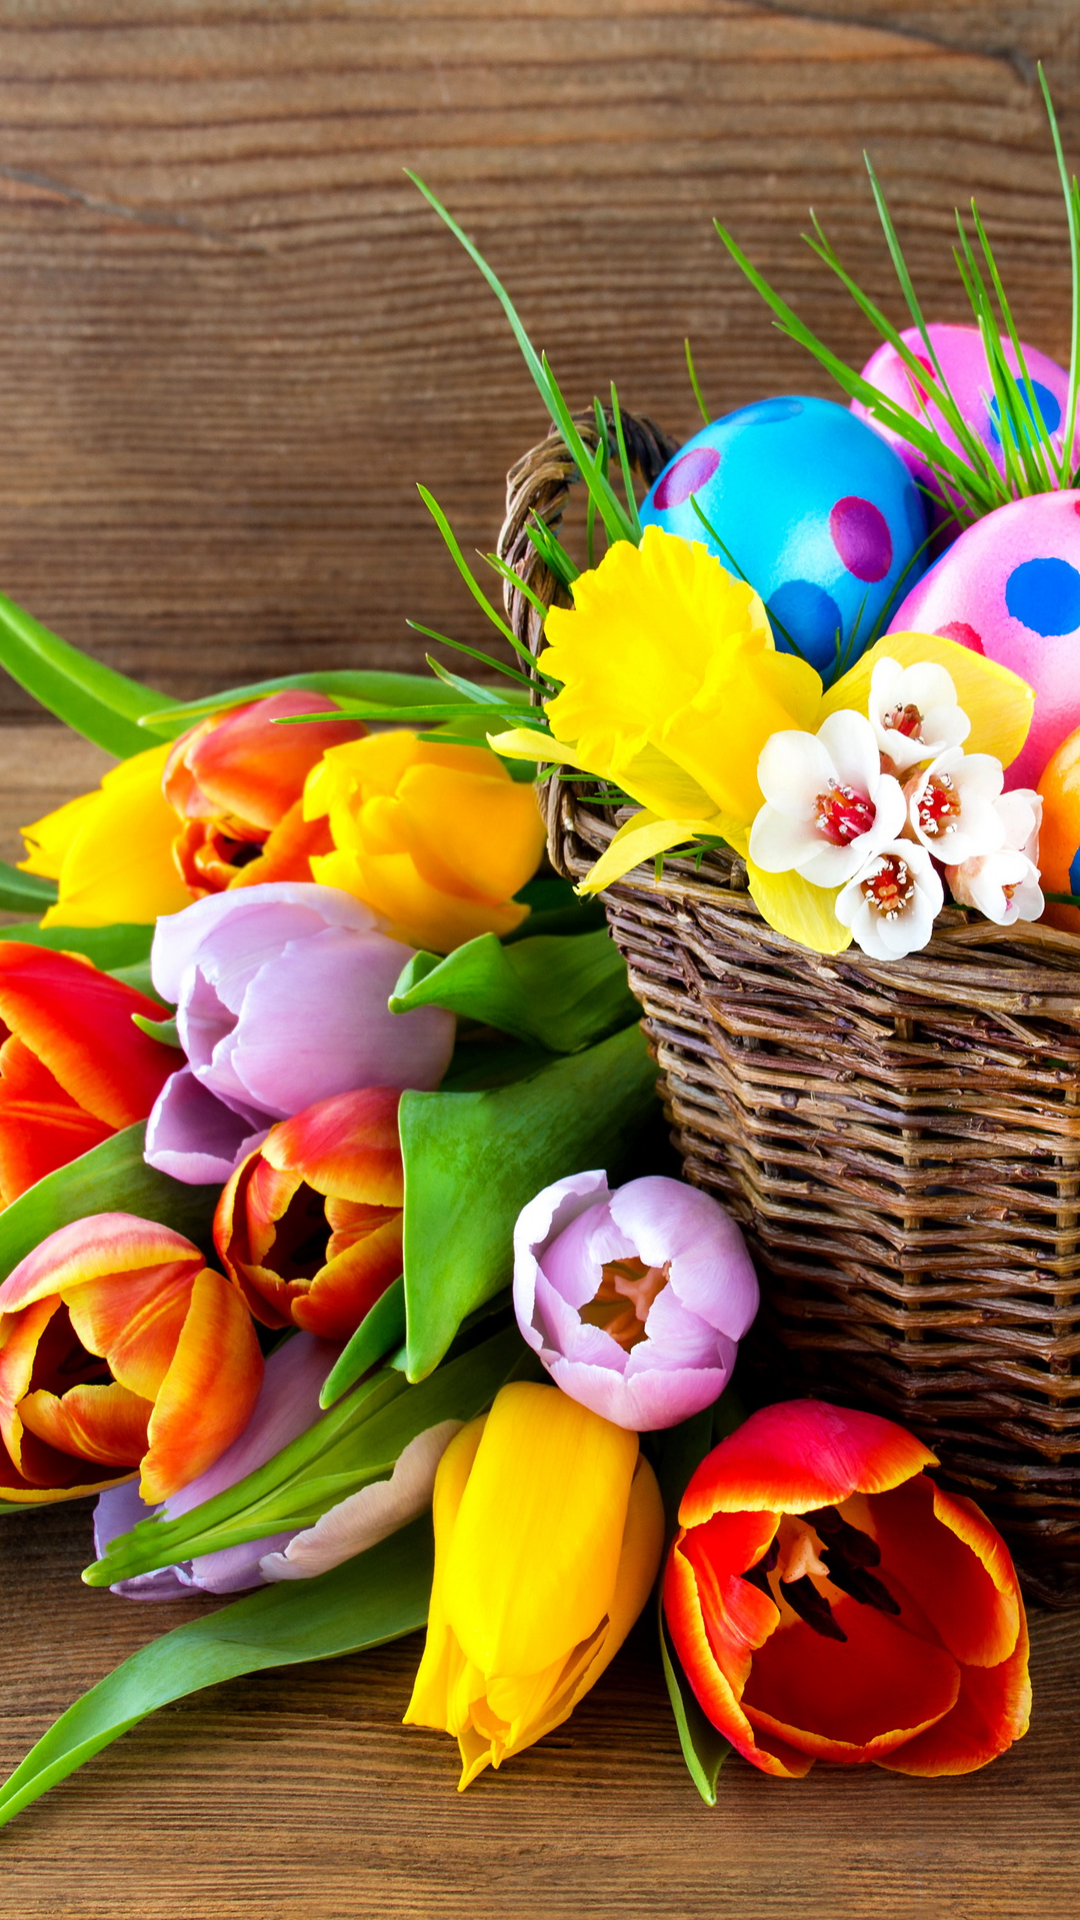 Happy Easter Basket Lumia Icon Wallpaper 1080x1920 Easter